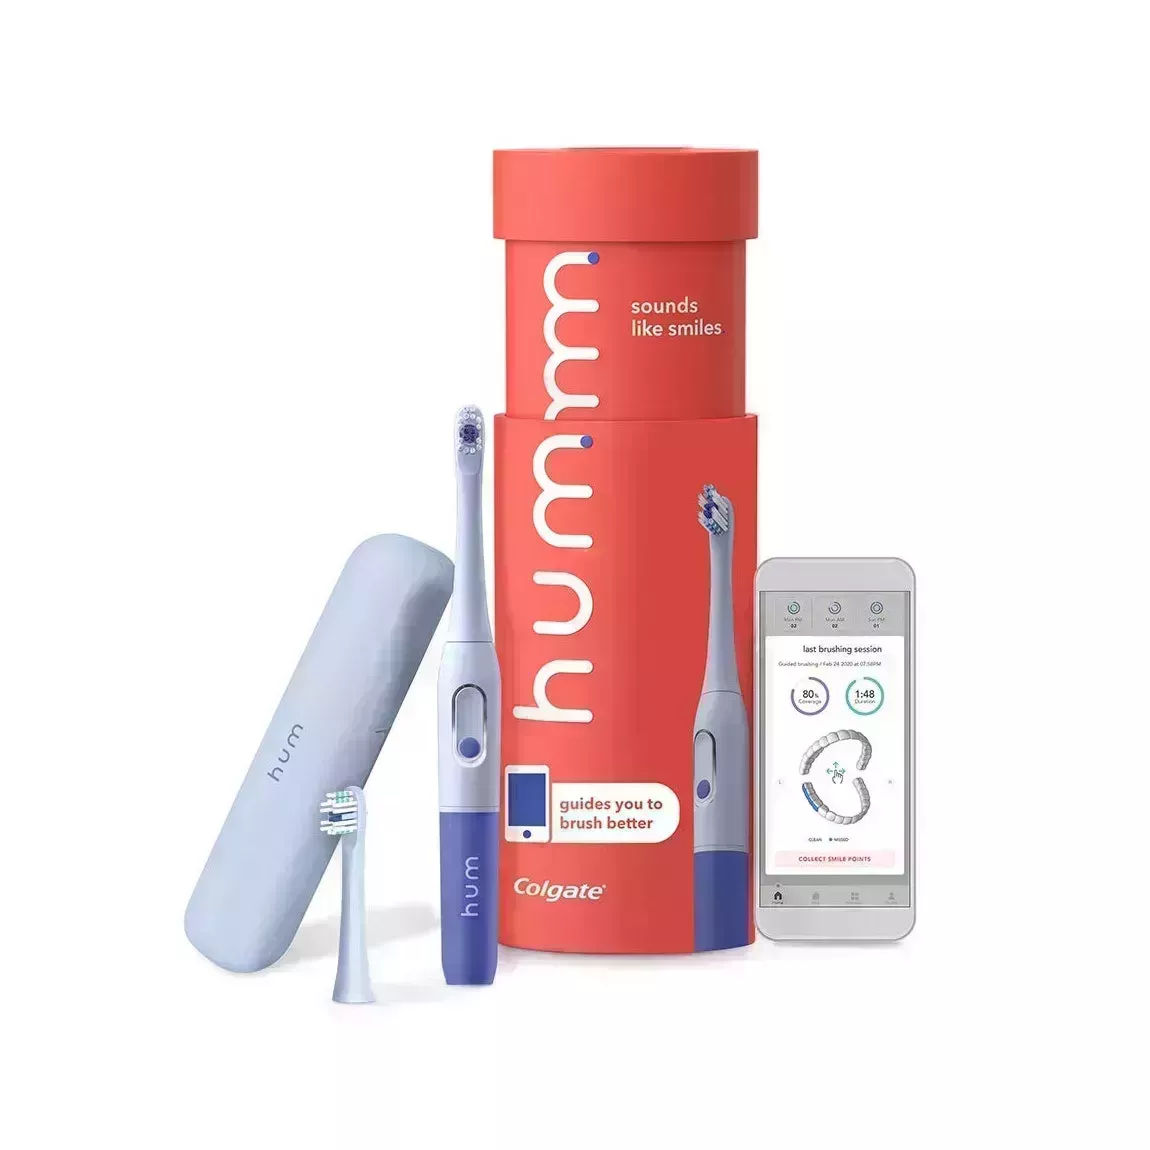 Hum by Colgate Rechargeable Electric Toothbrush Starter Kit blue electric toothbrush with red tube case and iPhone app on white background